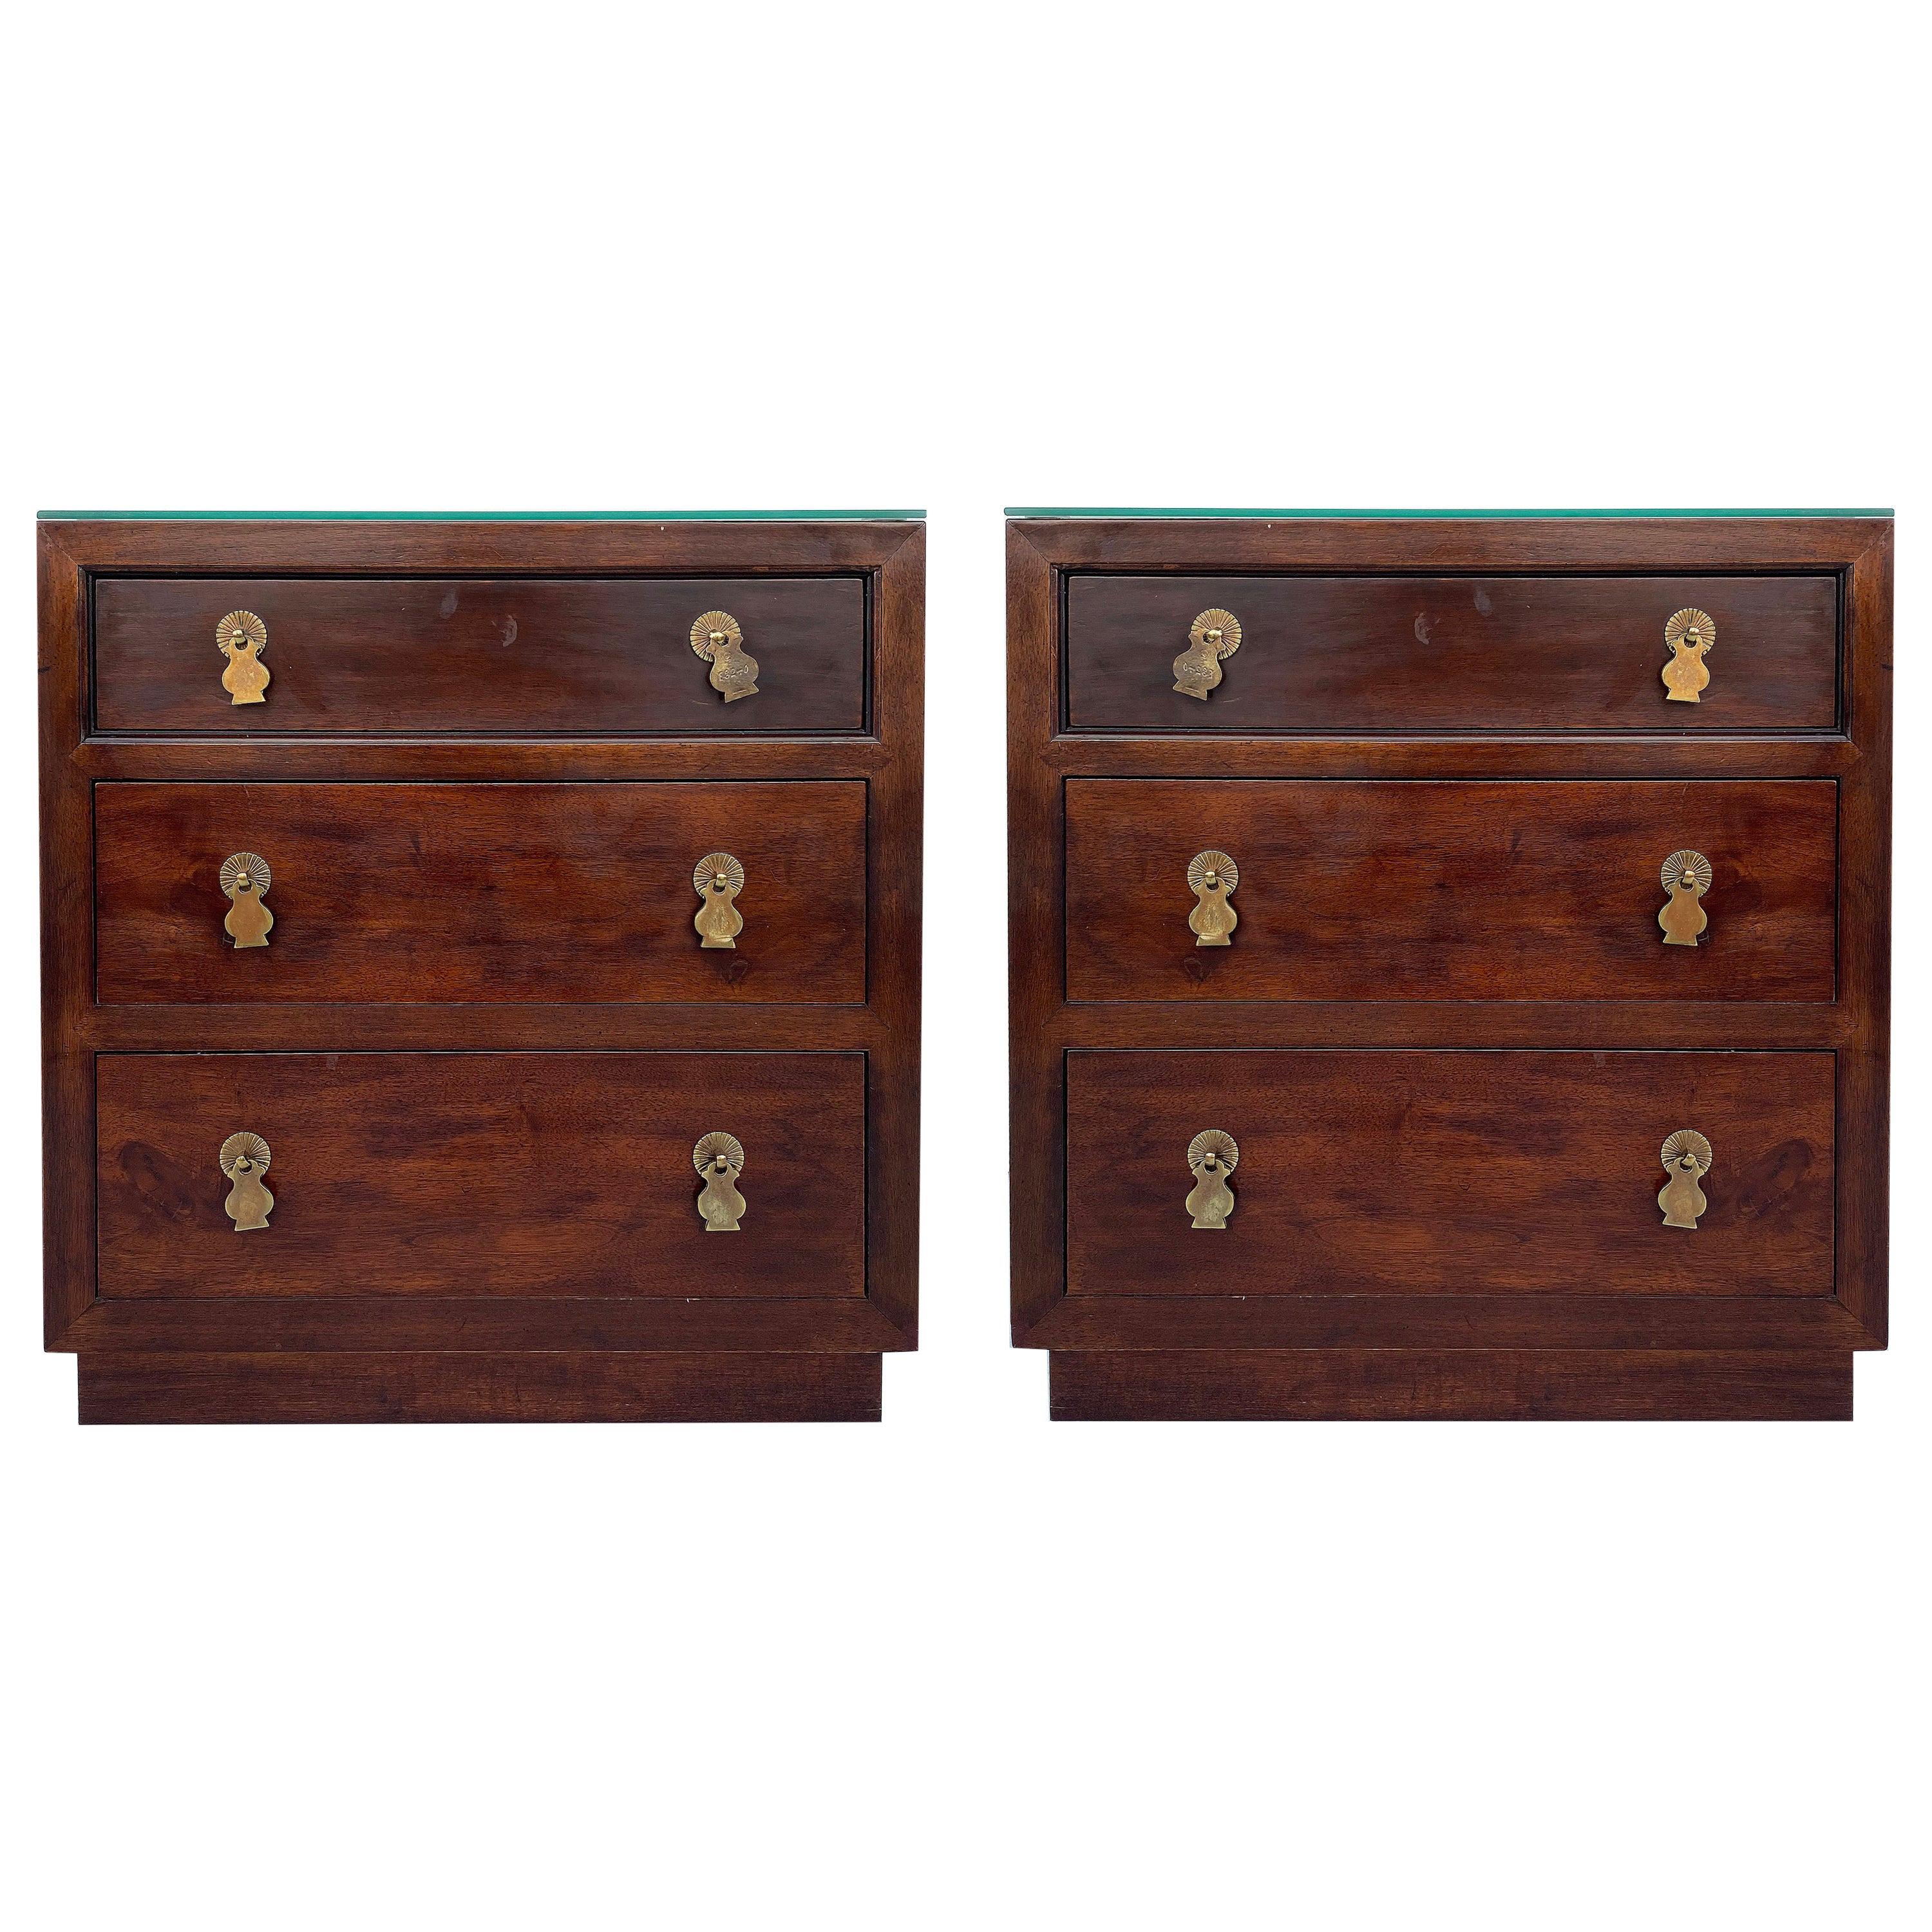 Henredon 3 Drawer Chests Nightstands with Brass Hardware, Pair